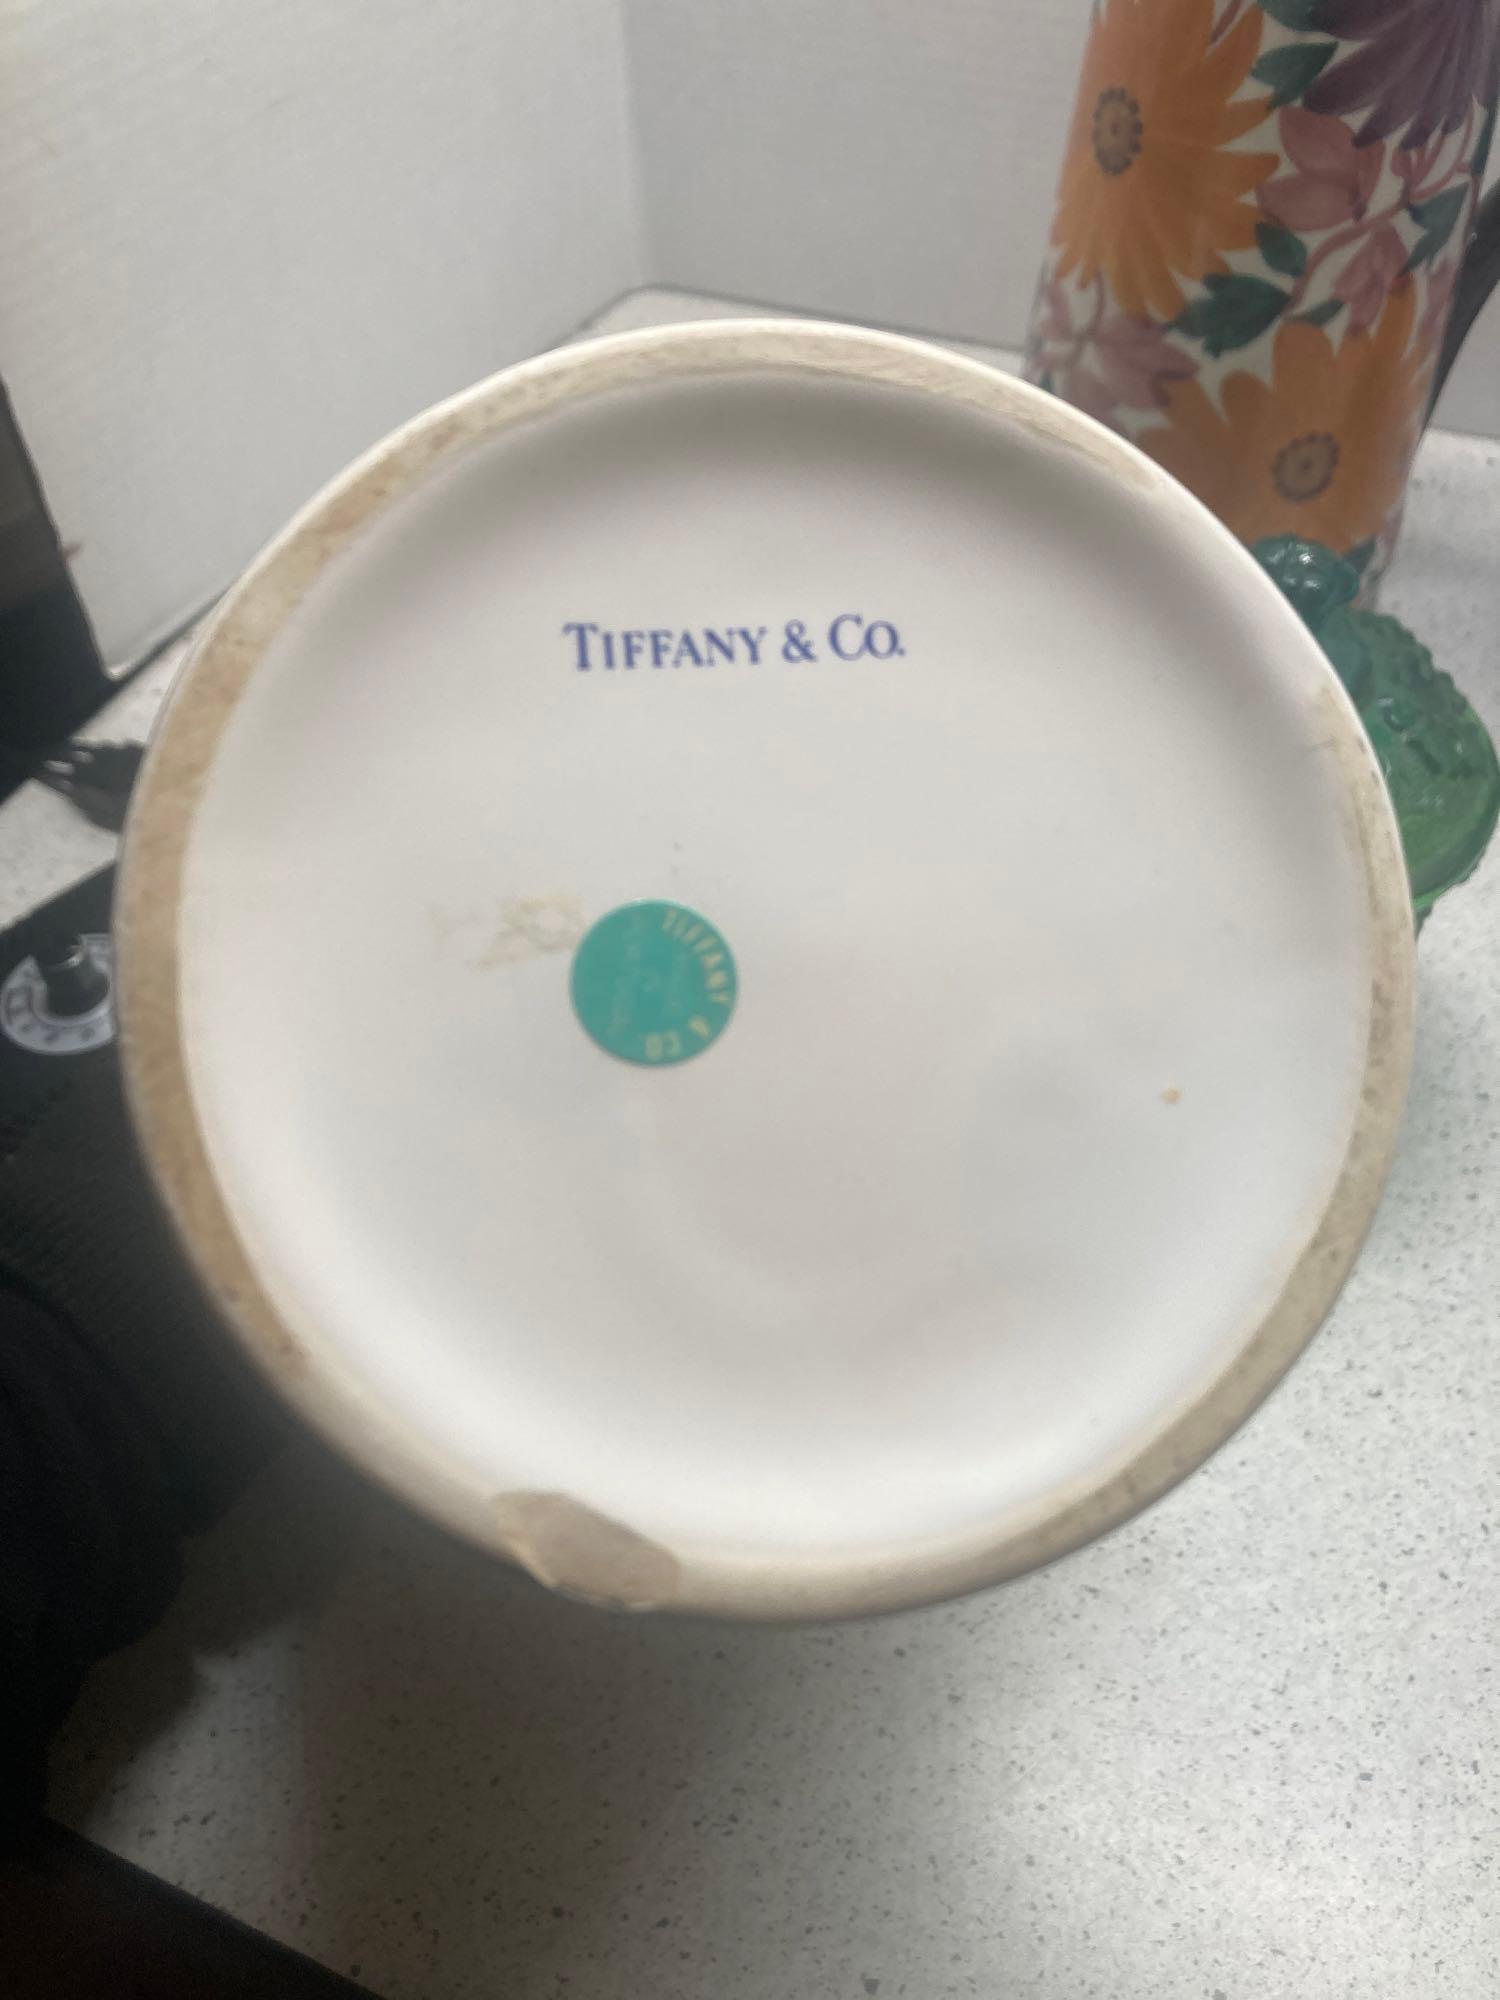 Tiffany and Co vase plus two vases from Germany